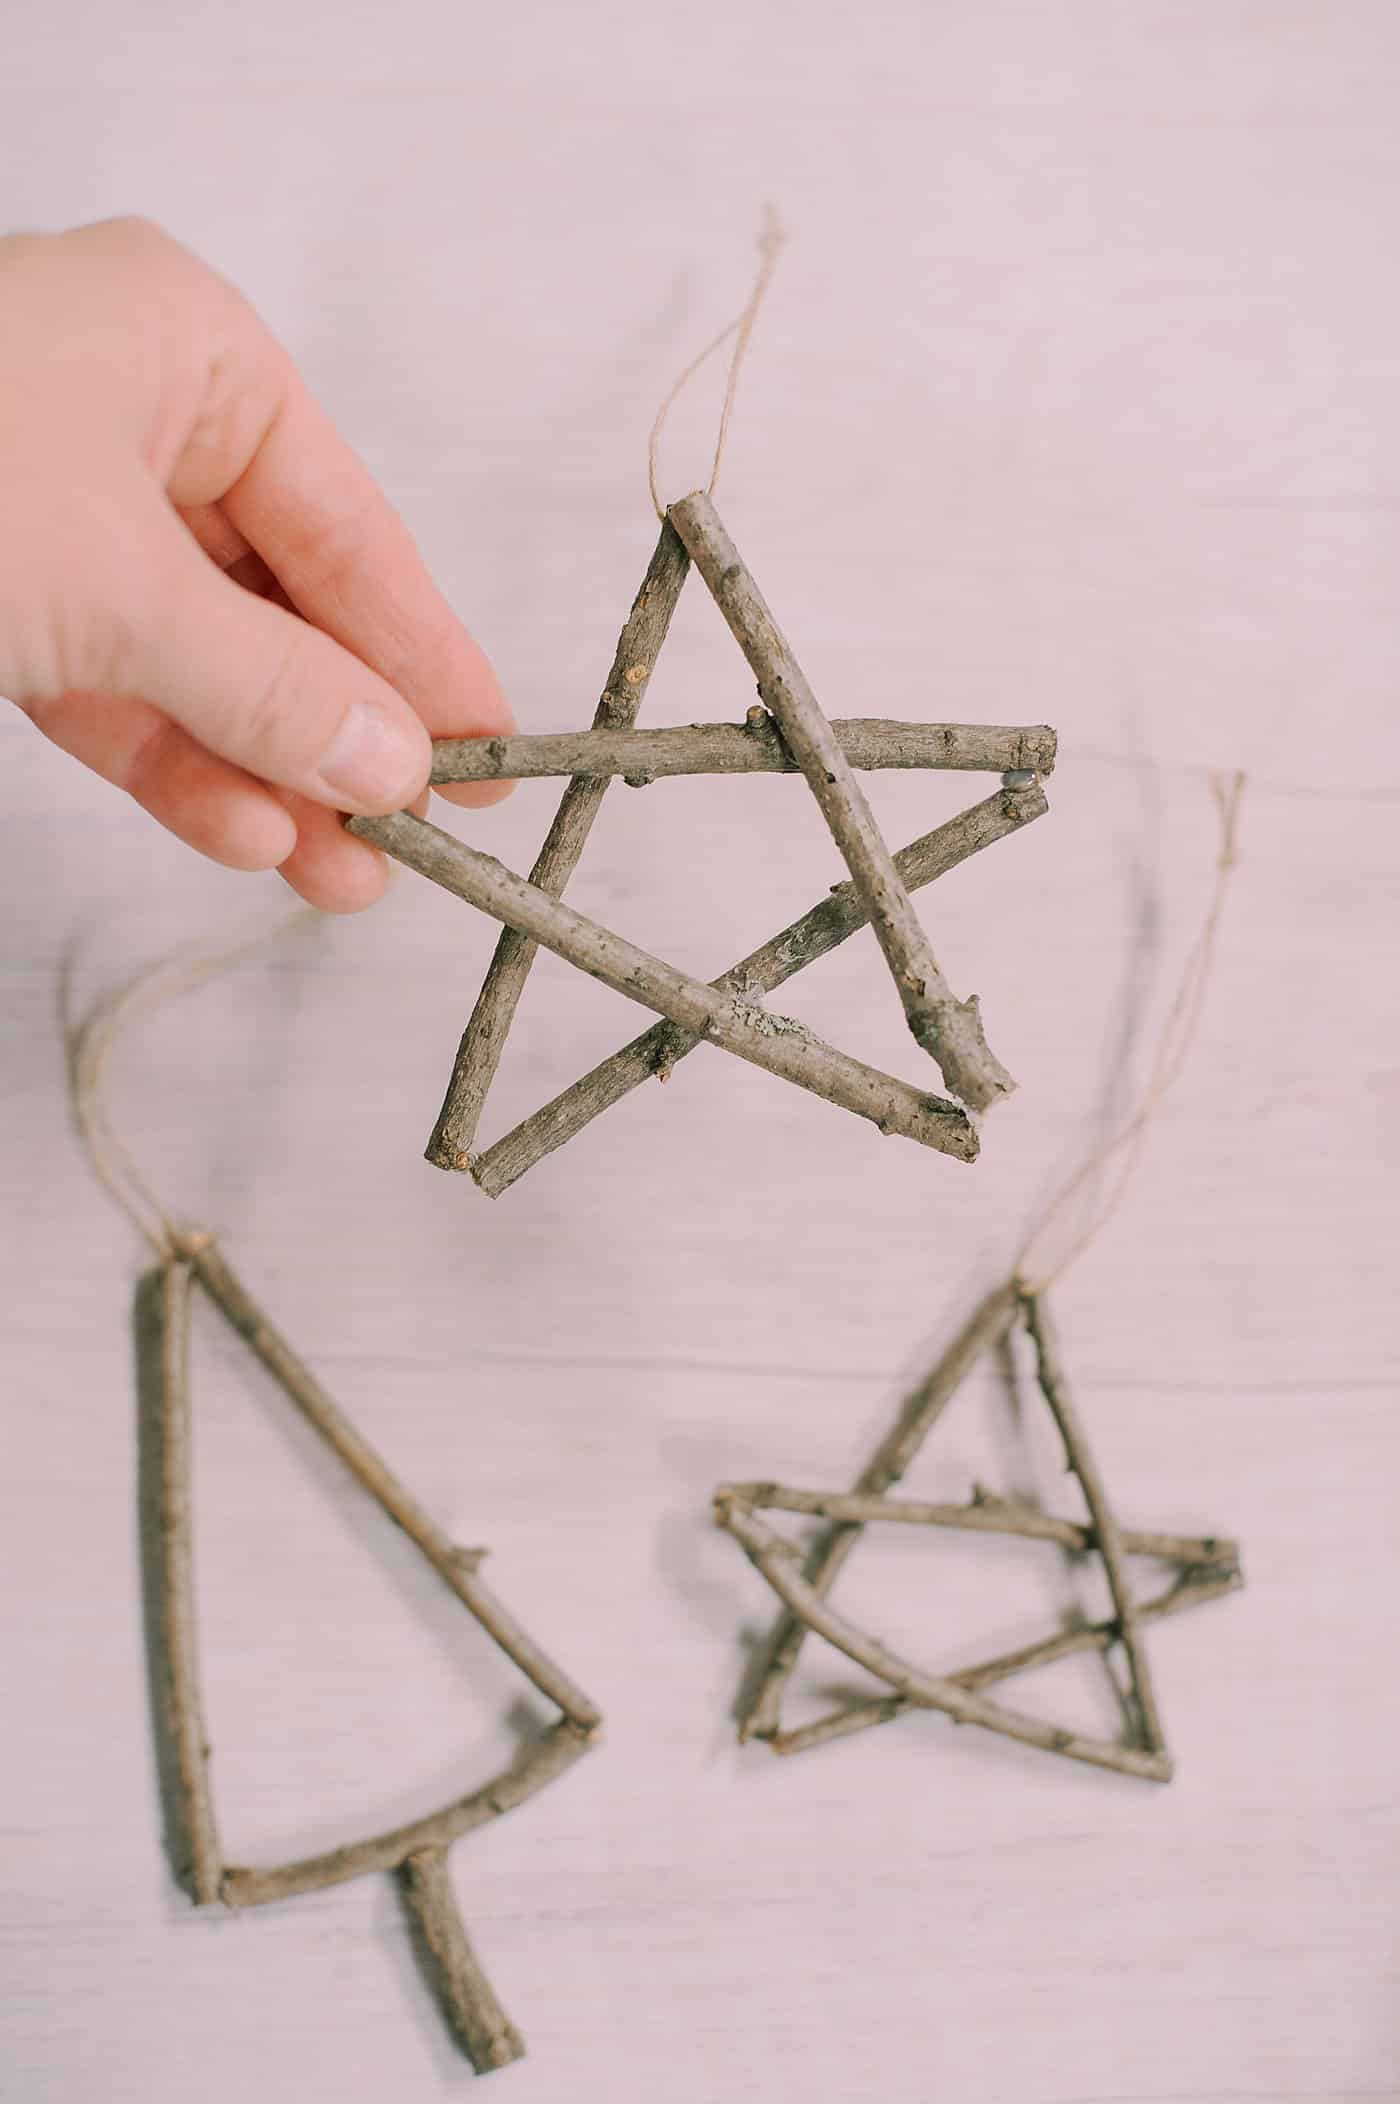 Ornaments made with sticks - a star shape and a Christmas Tree shape with twine hanging strings.